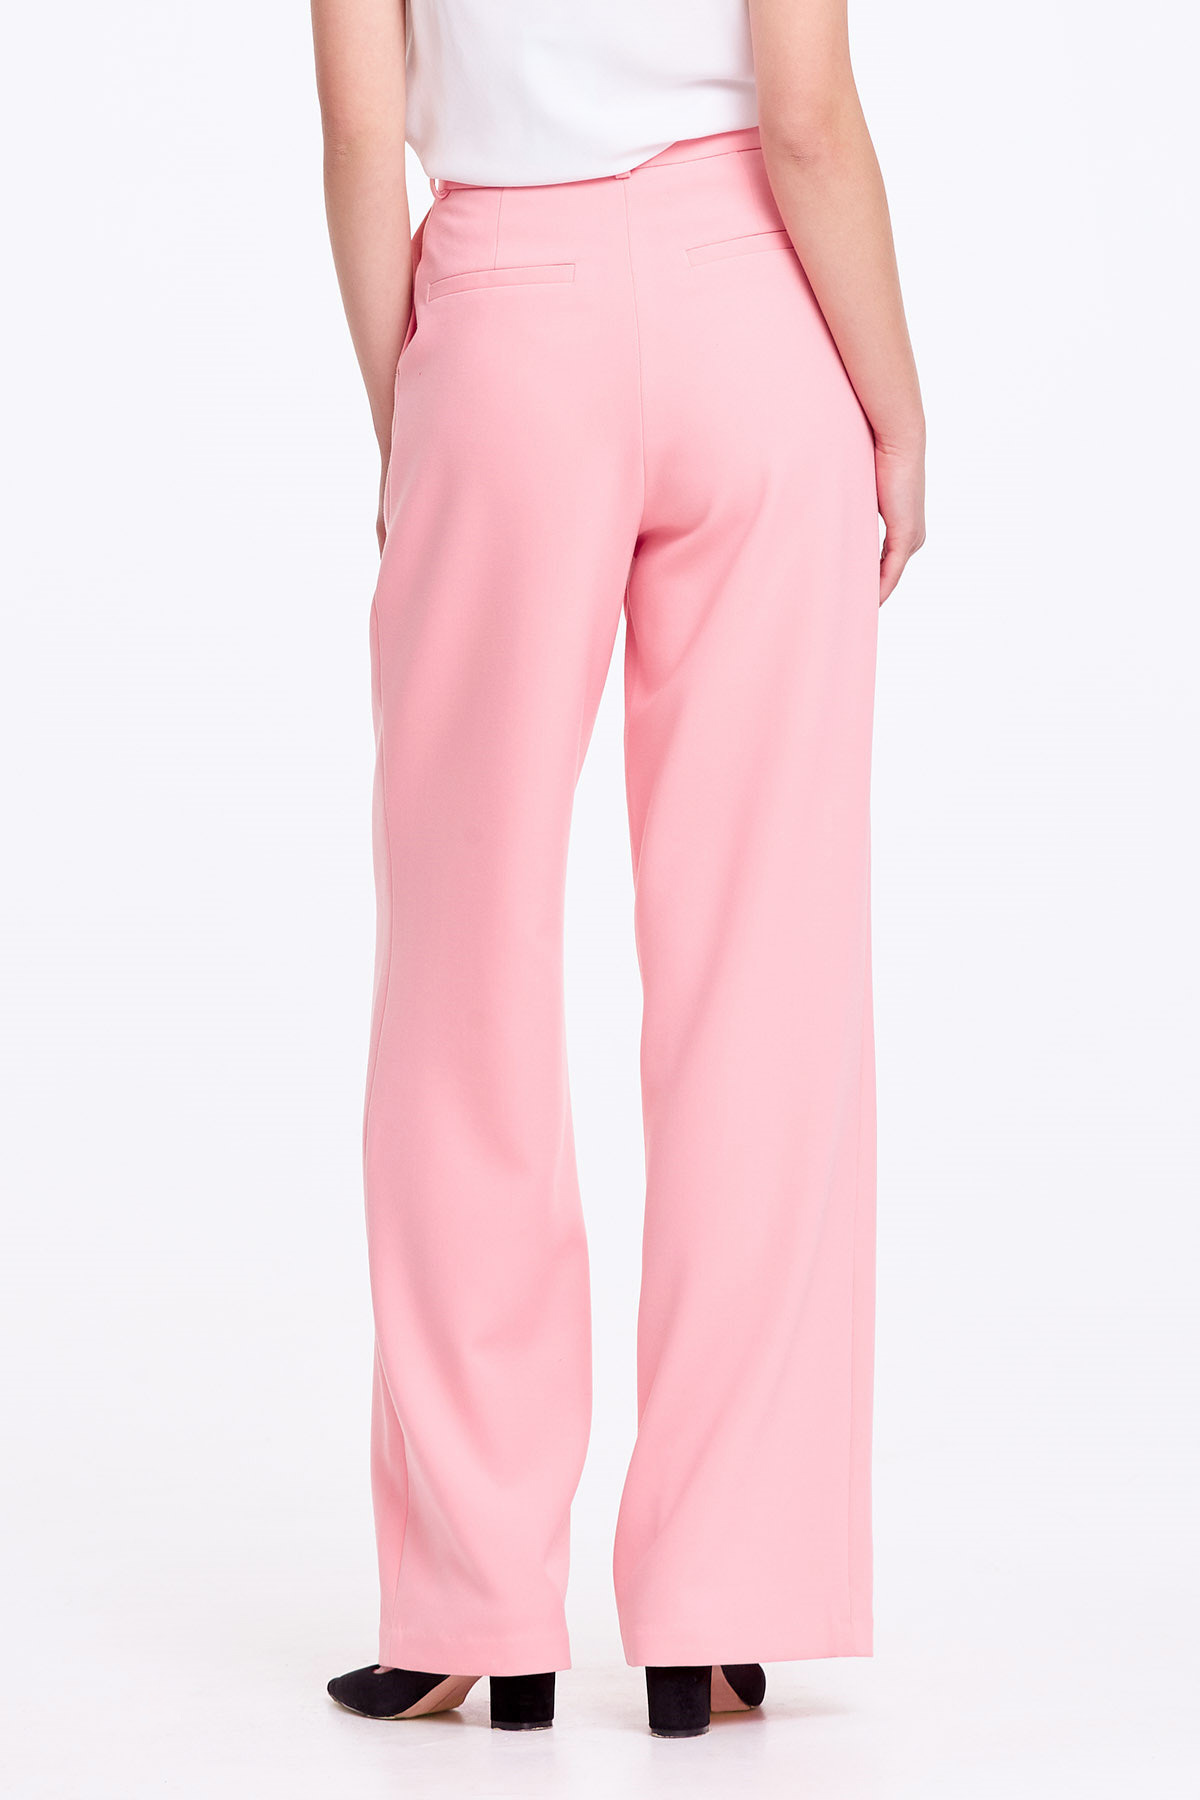 Wide leg pink trousers , photo 4